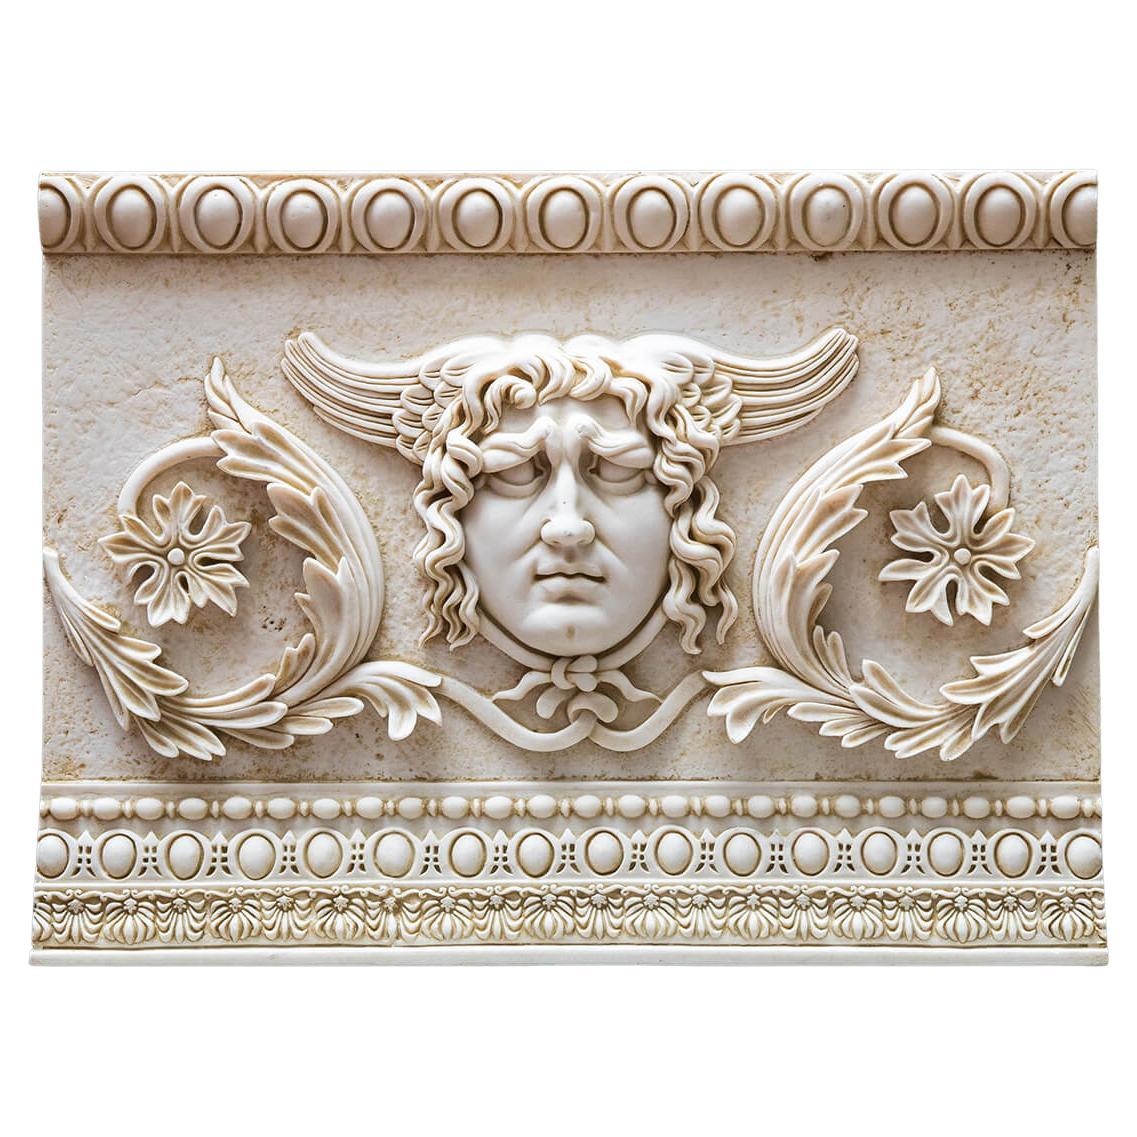 Medusa Relief Statue Made with Compressed Marble Powder